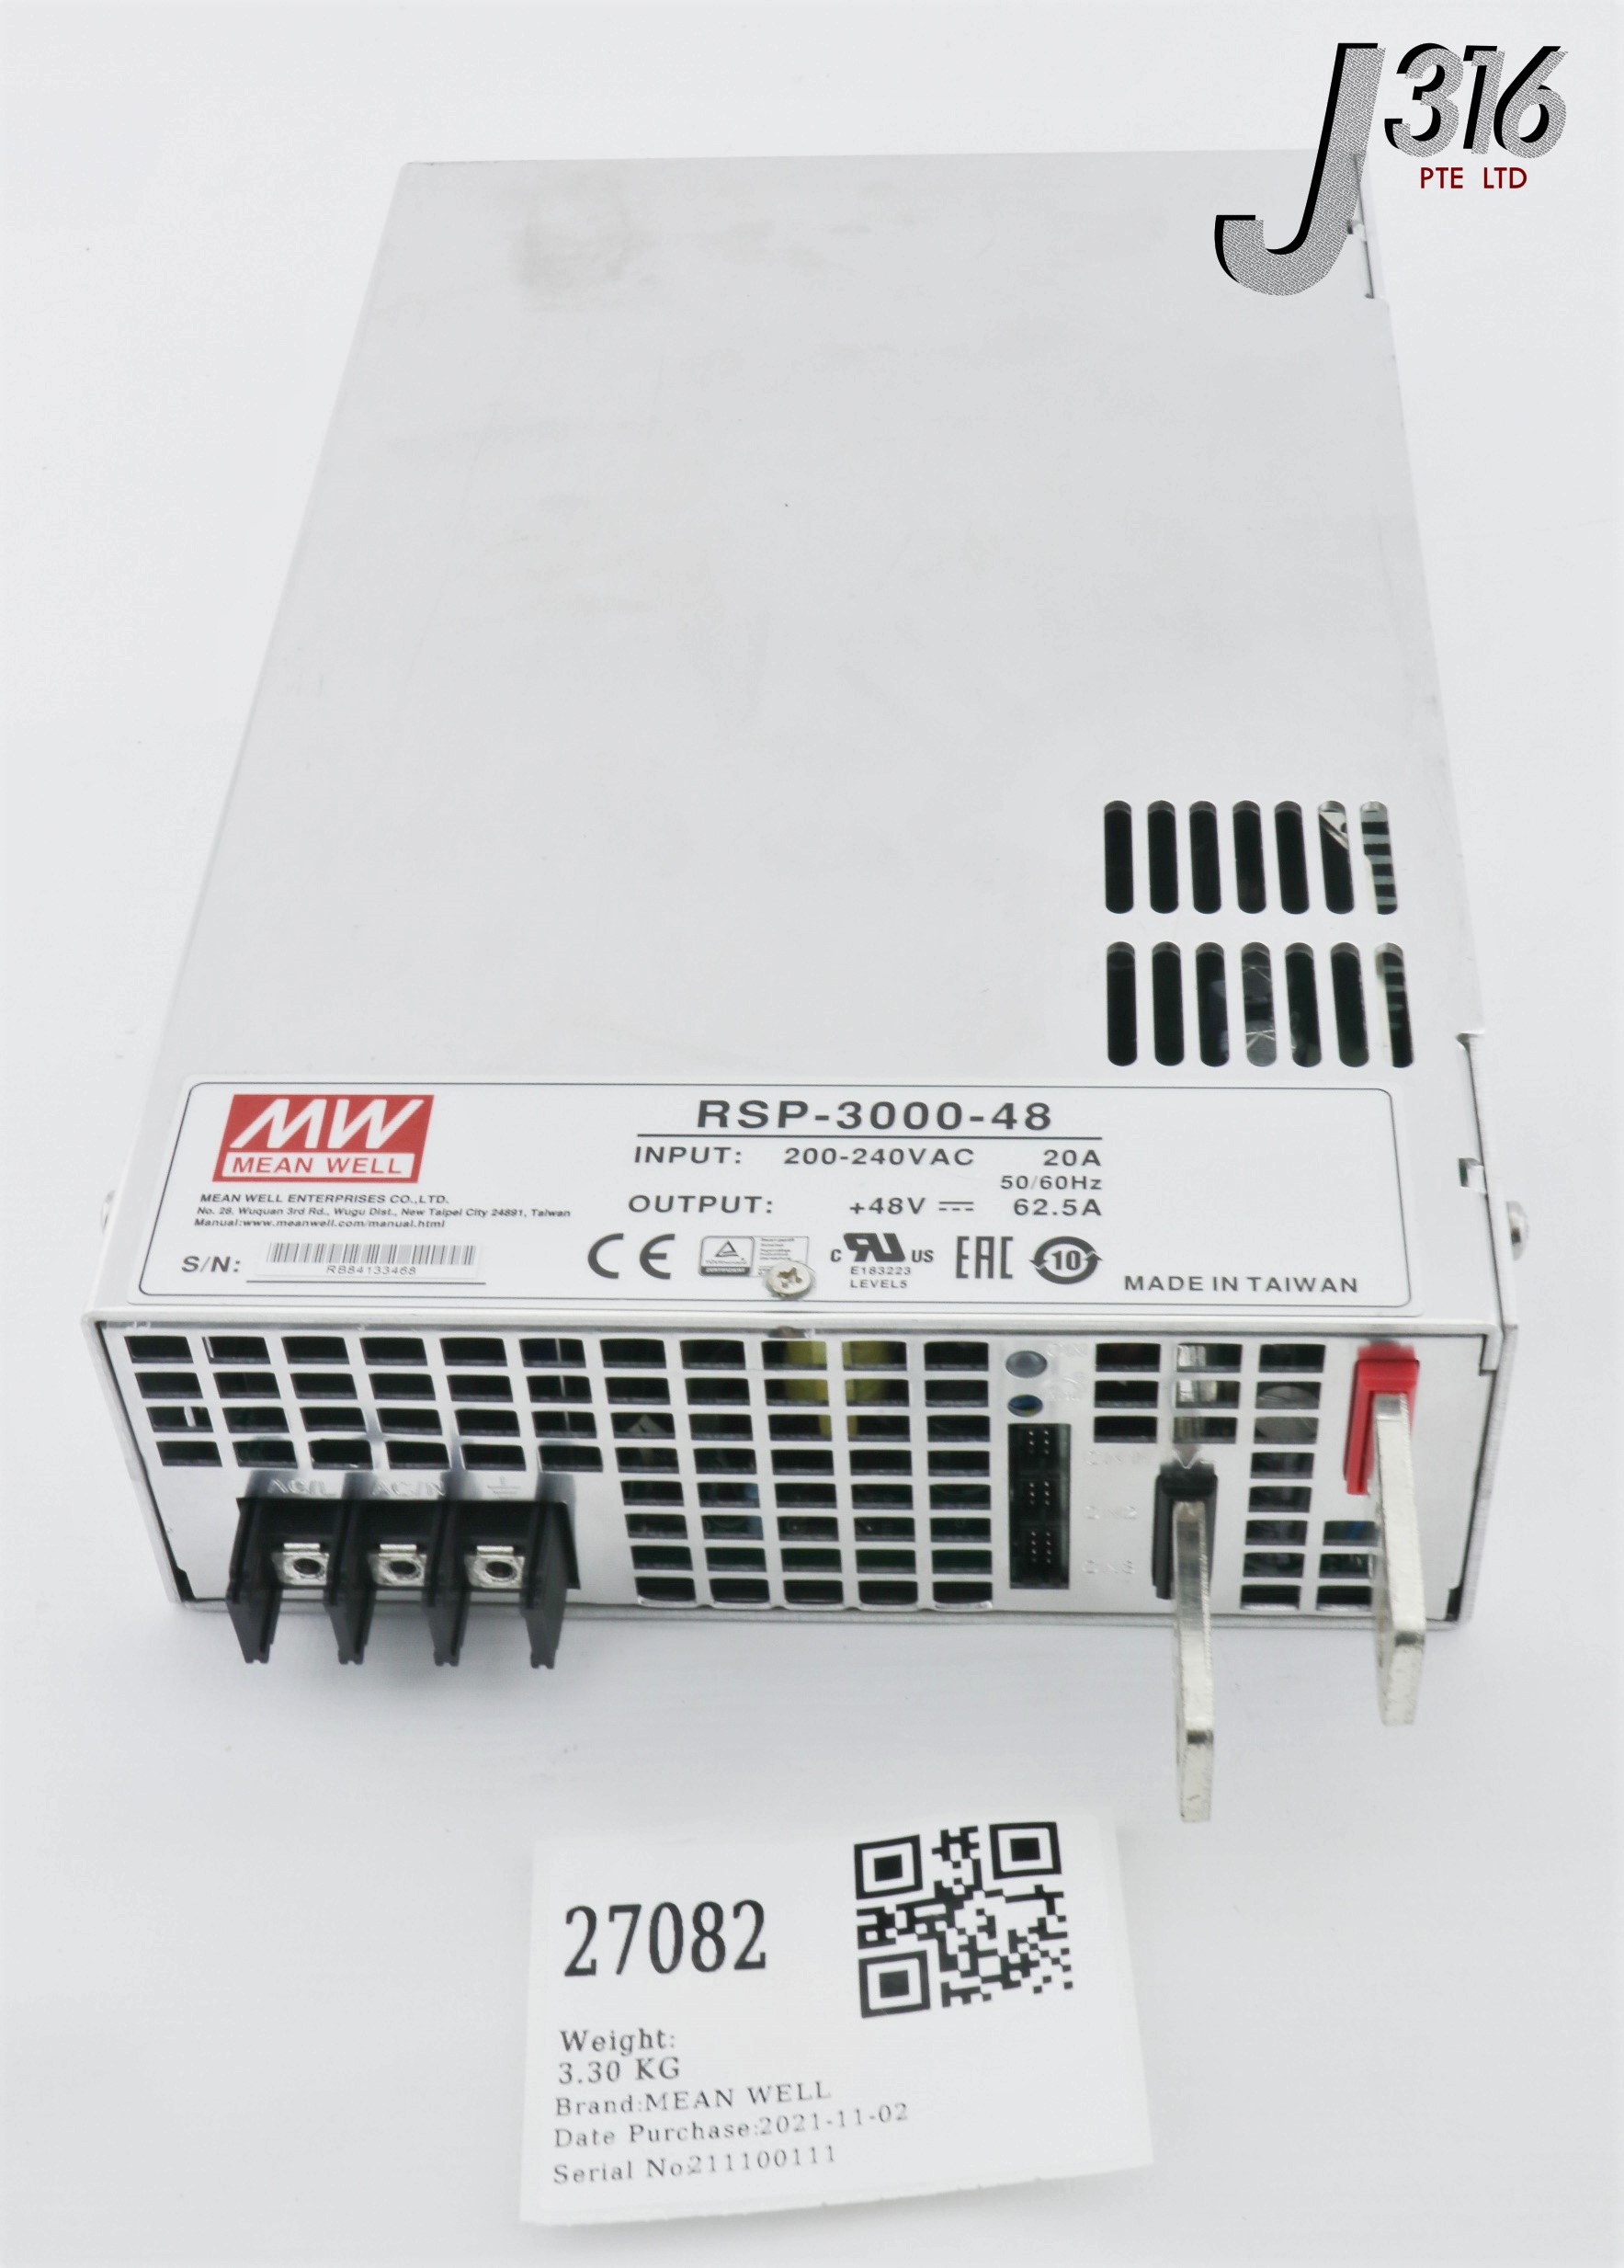 27082 MEAN WELL POWER SUPPLY, INPUT: 200-240VAC, OUTPUT: 48VDC 62.5A  (PARTS) RSP-3000-48 J316Gallery